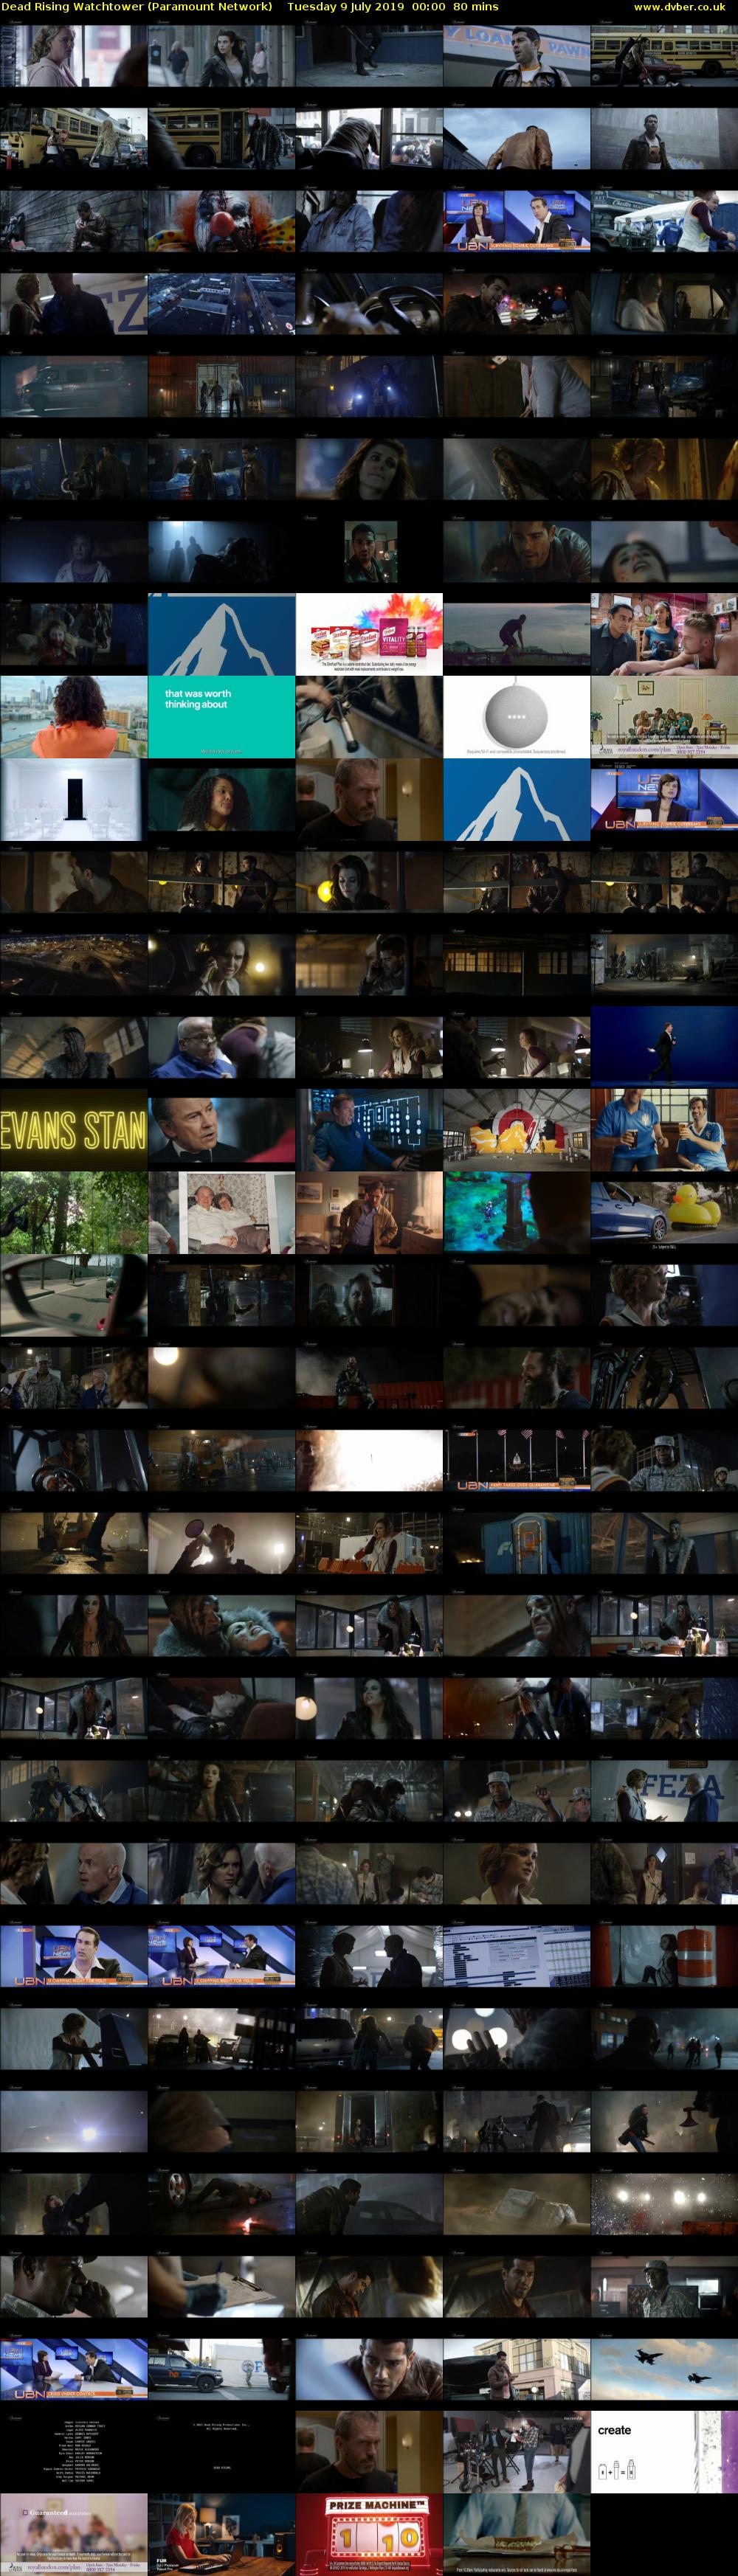 Dead Rising Watchtower (Paramount Network) Tuesday 9 July 2019 00:00 - 01:20